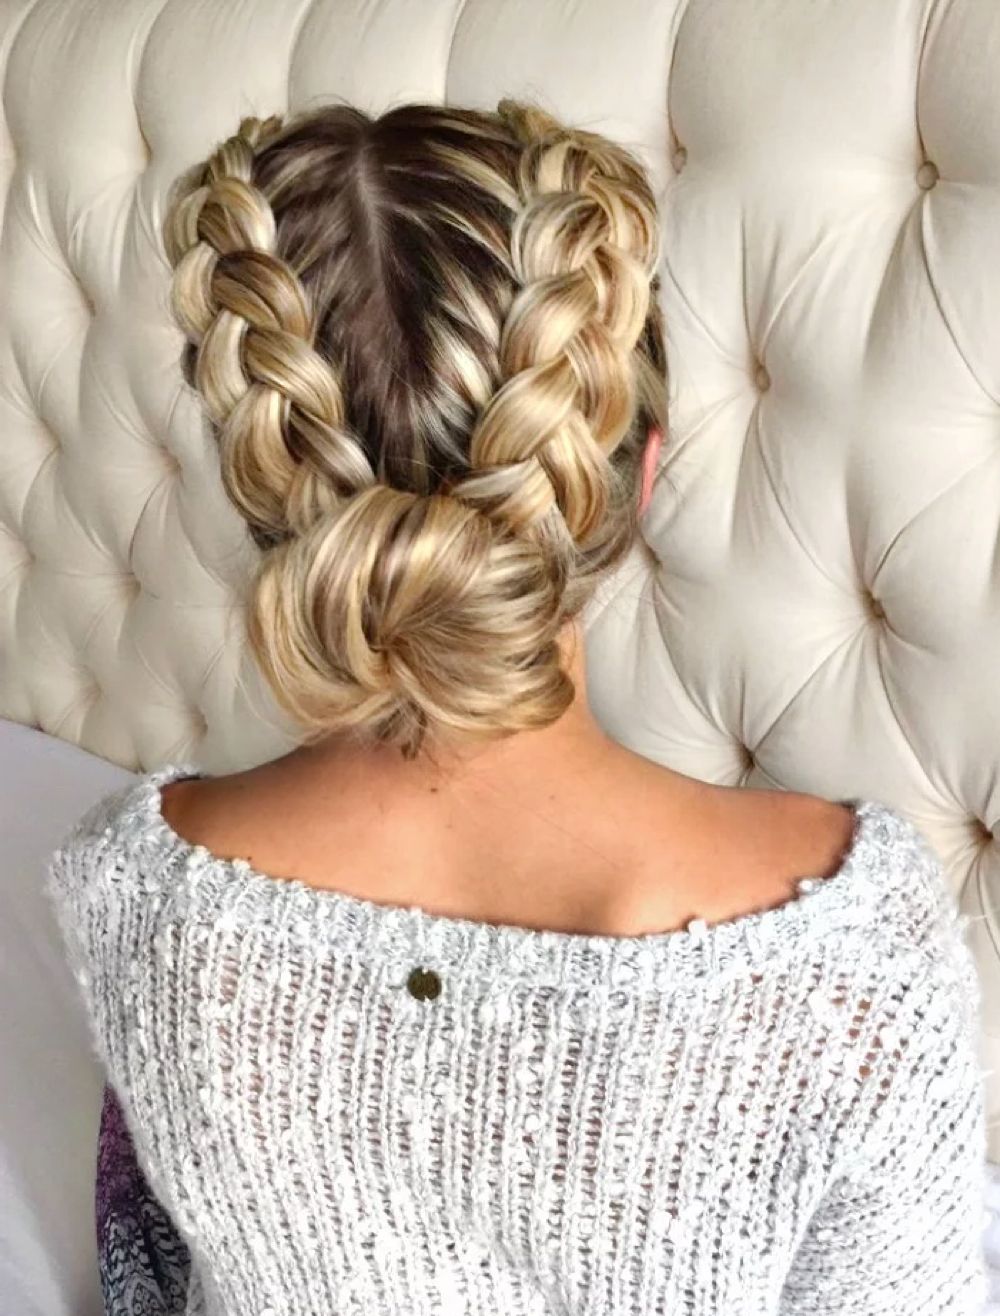 Favorite Tight Black Swirling Under Braid Hairstyles With Regard To 29 Gorgeous Braided Updo Ideas For  (View 19 of 20)